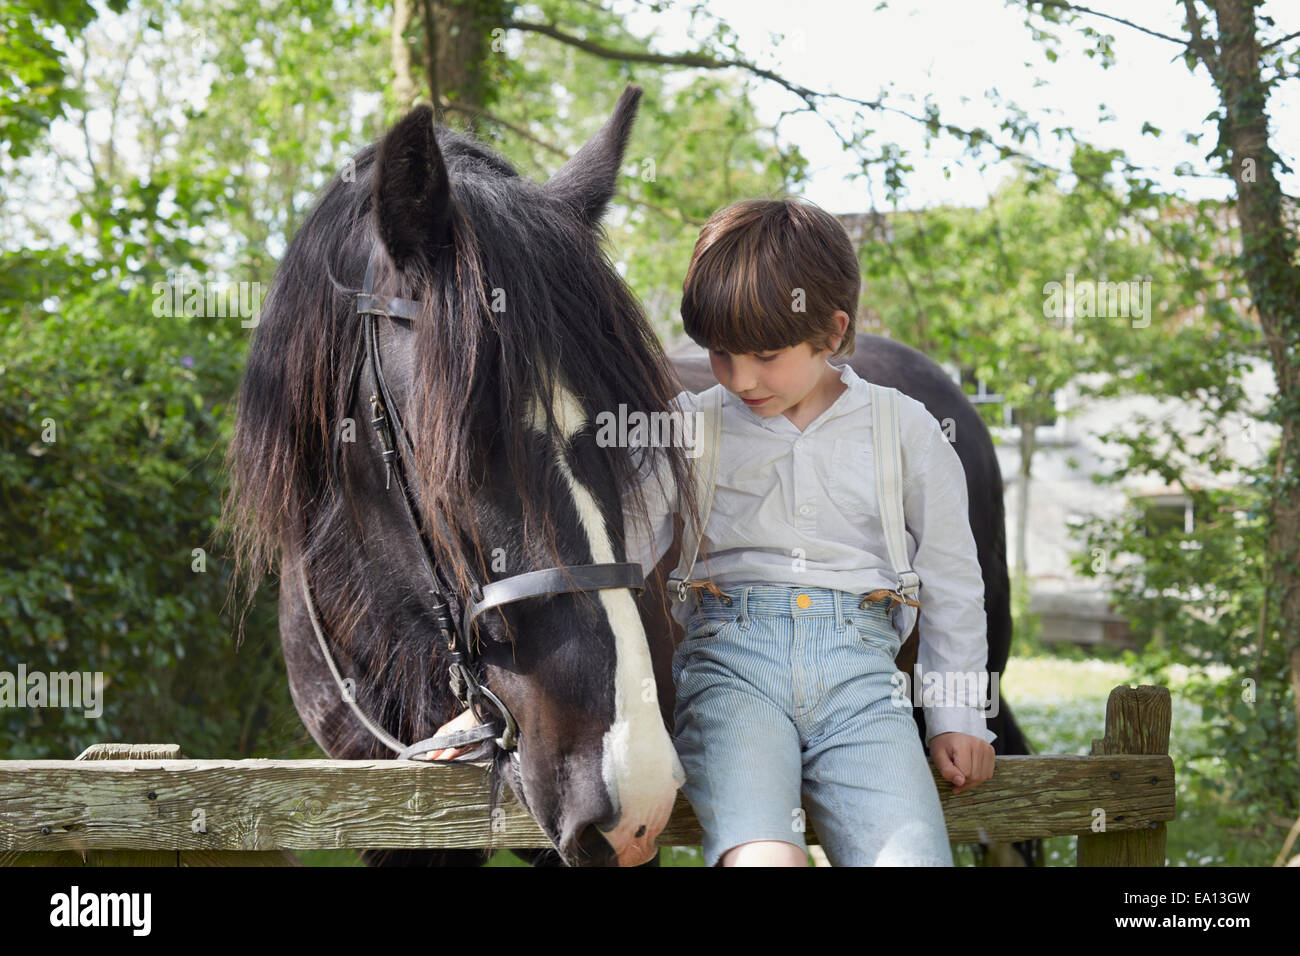 Portrait of boy sitting on farm gate with horse Stock Photo